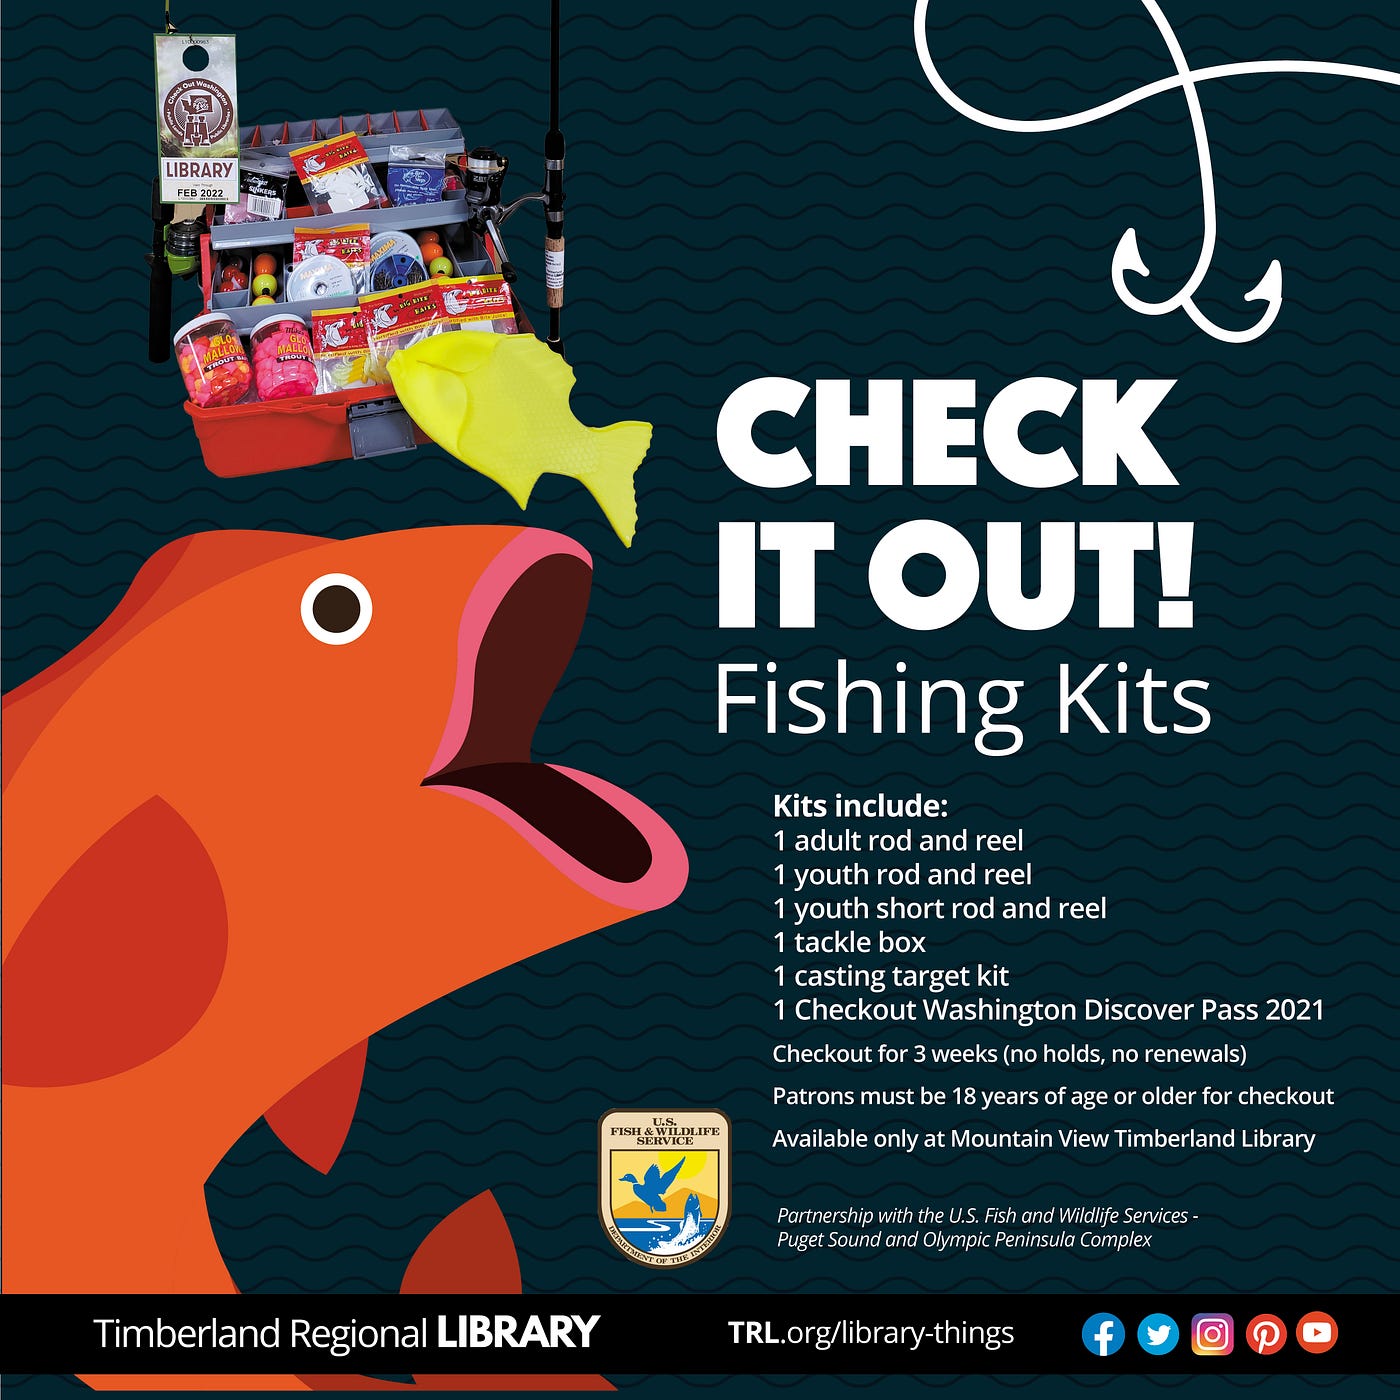 Card Carrying Anglers. New program offers fishing kits at…